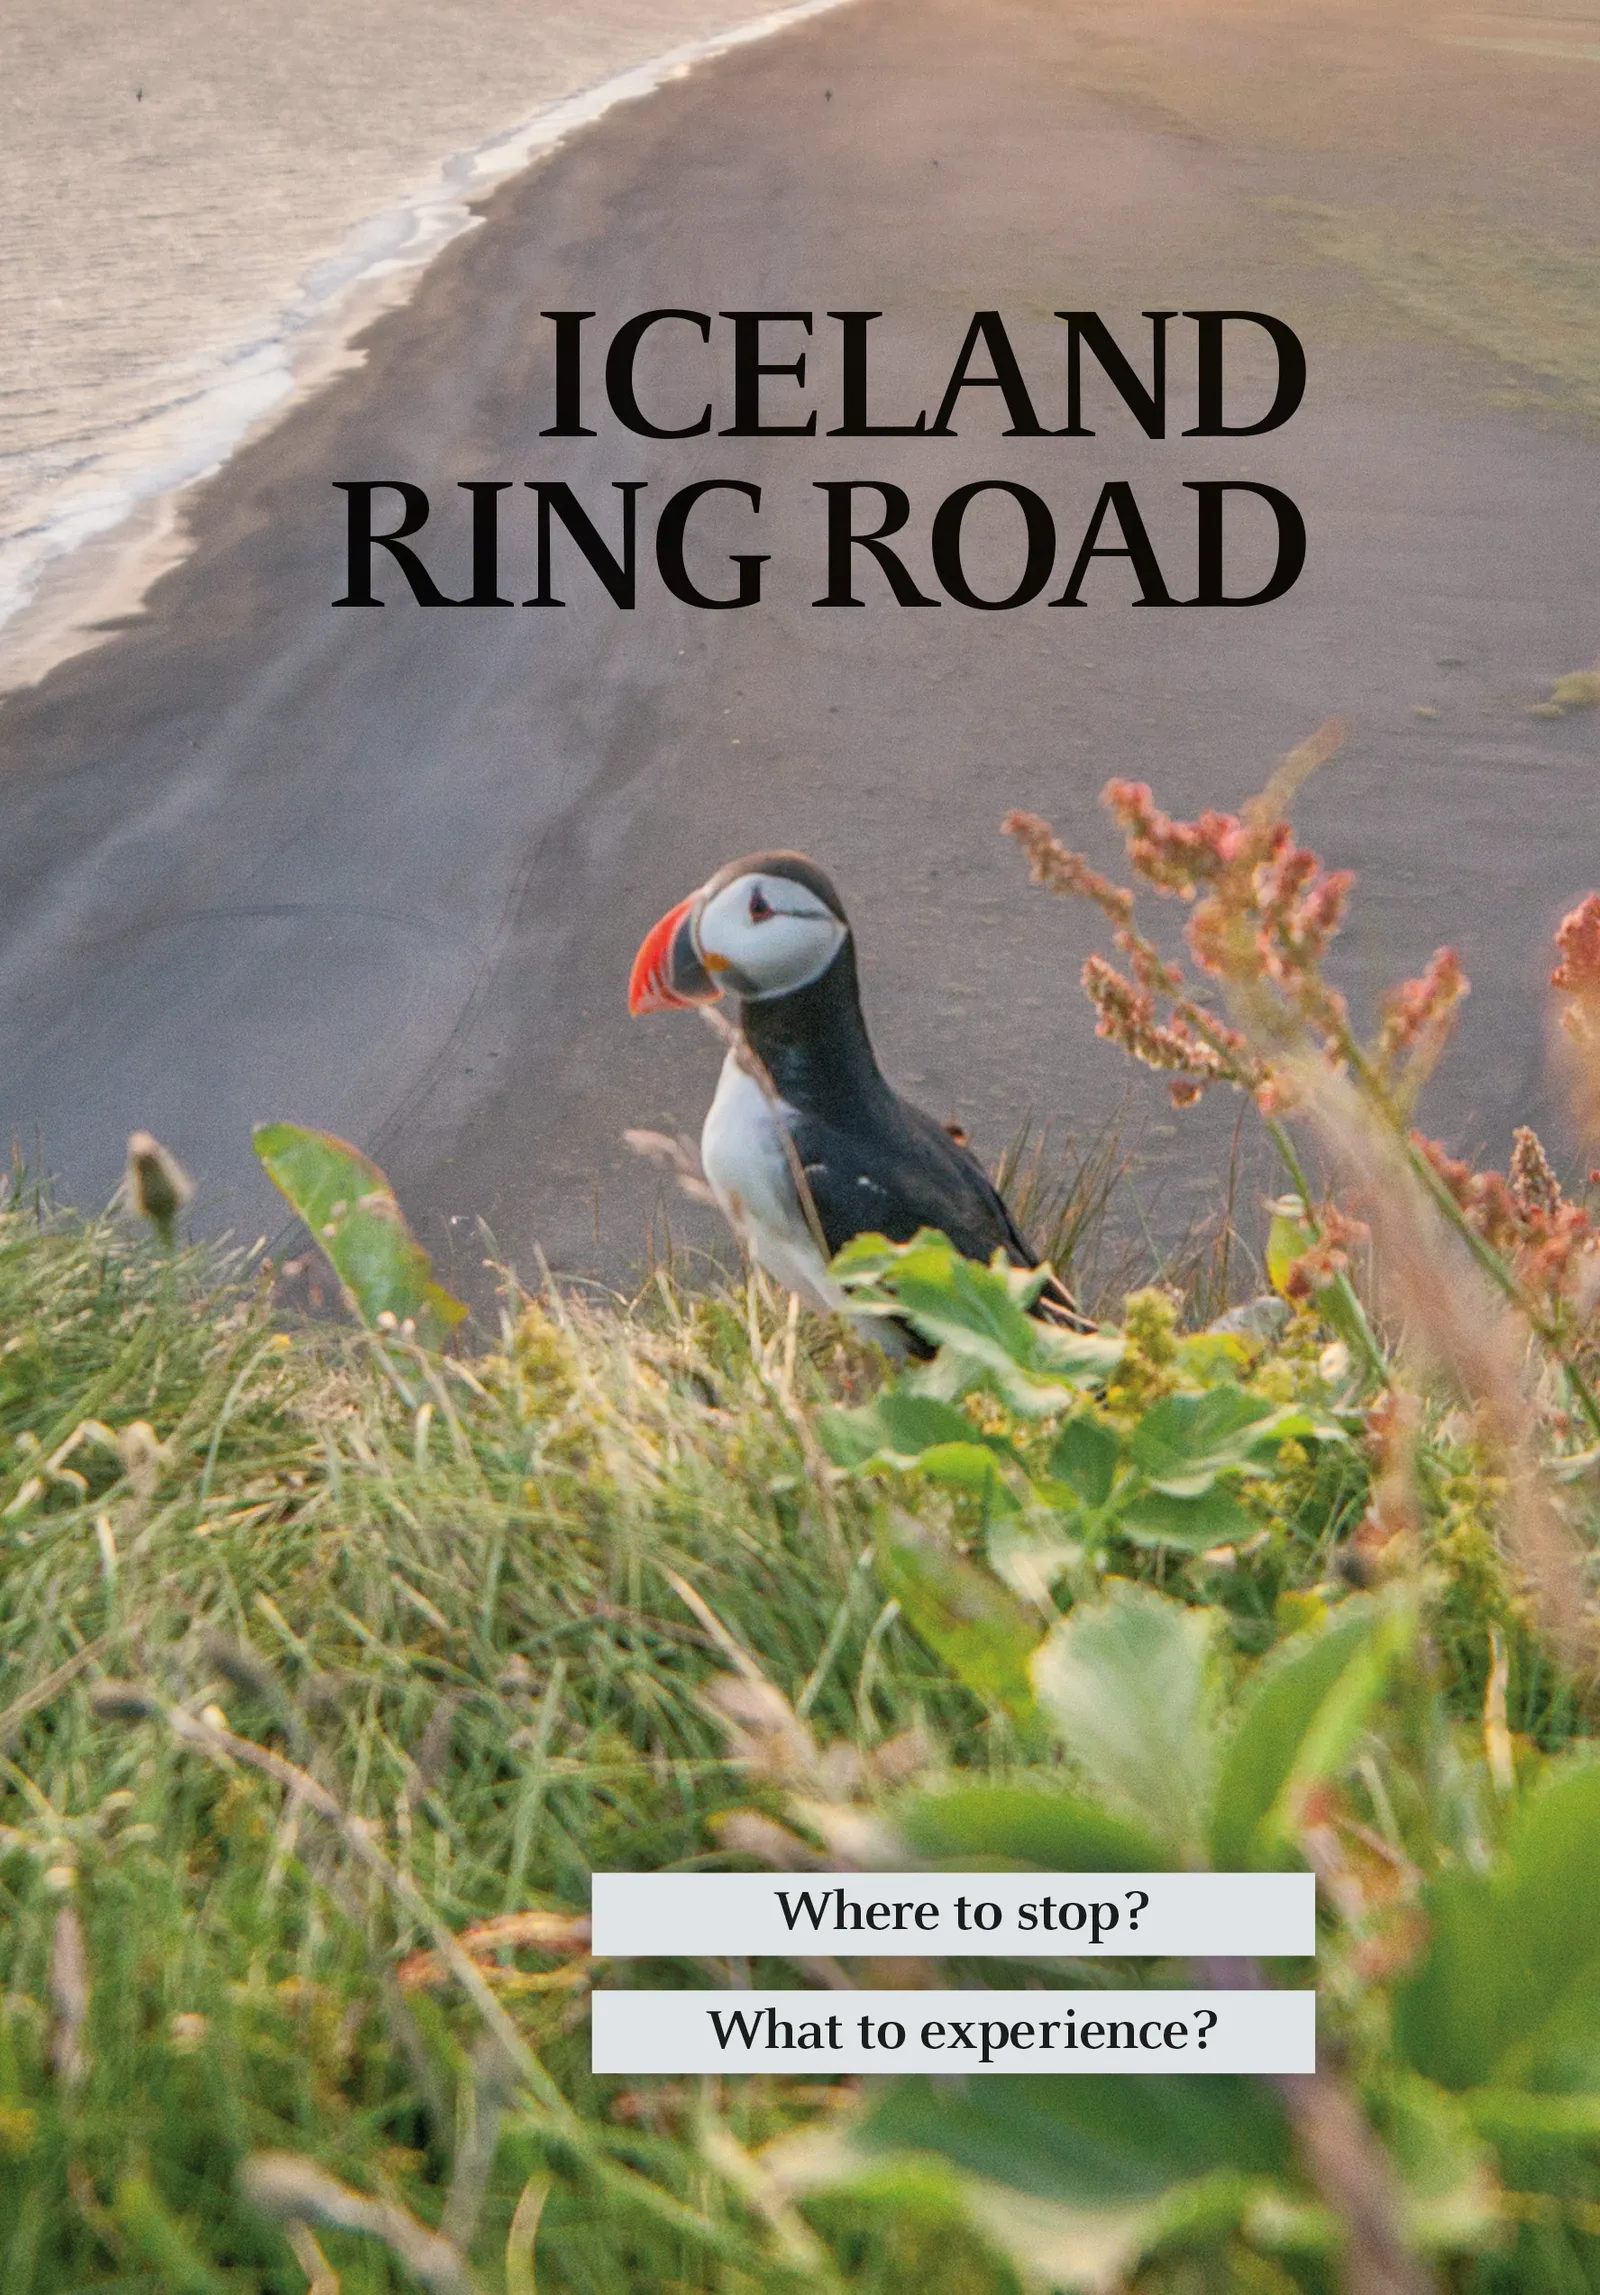 Bókakápa: Iceland Ring Road Where to stop? What to experience?